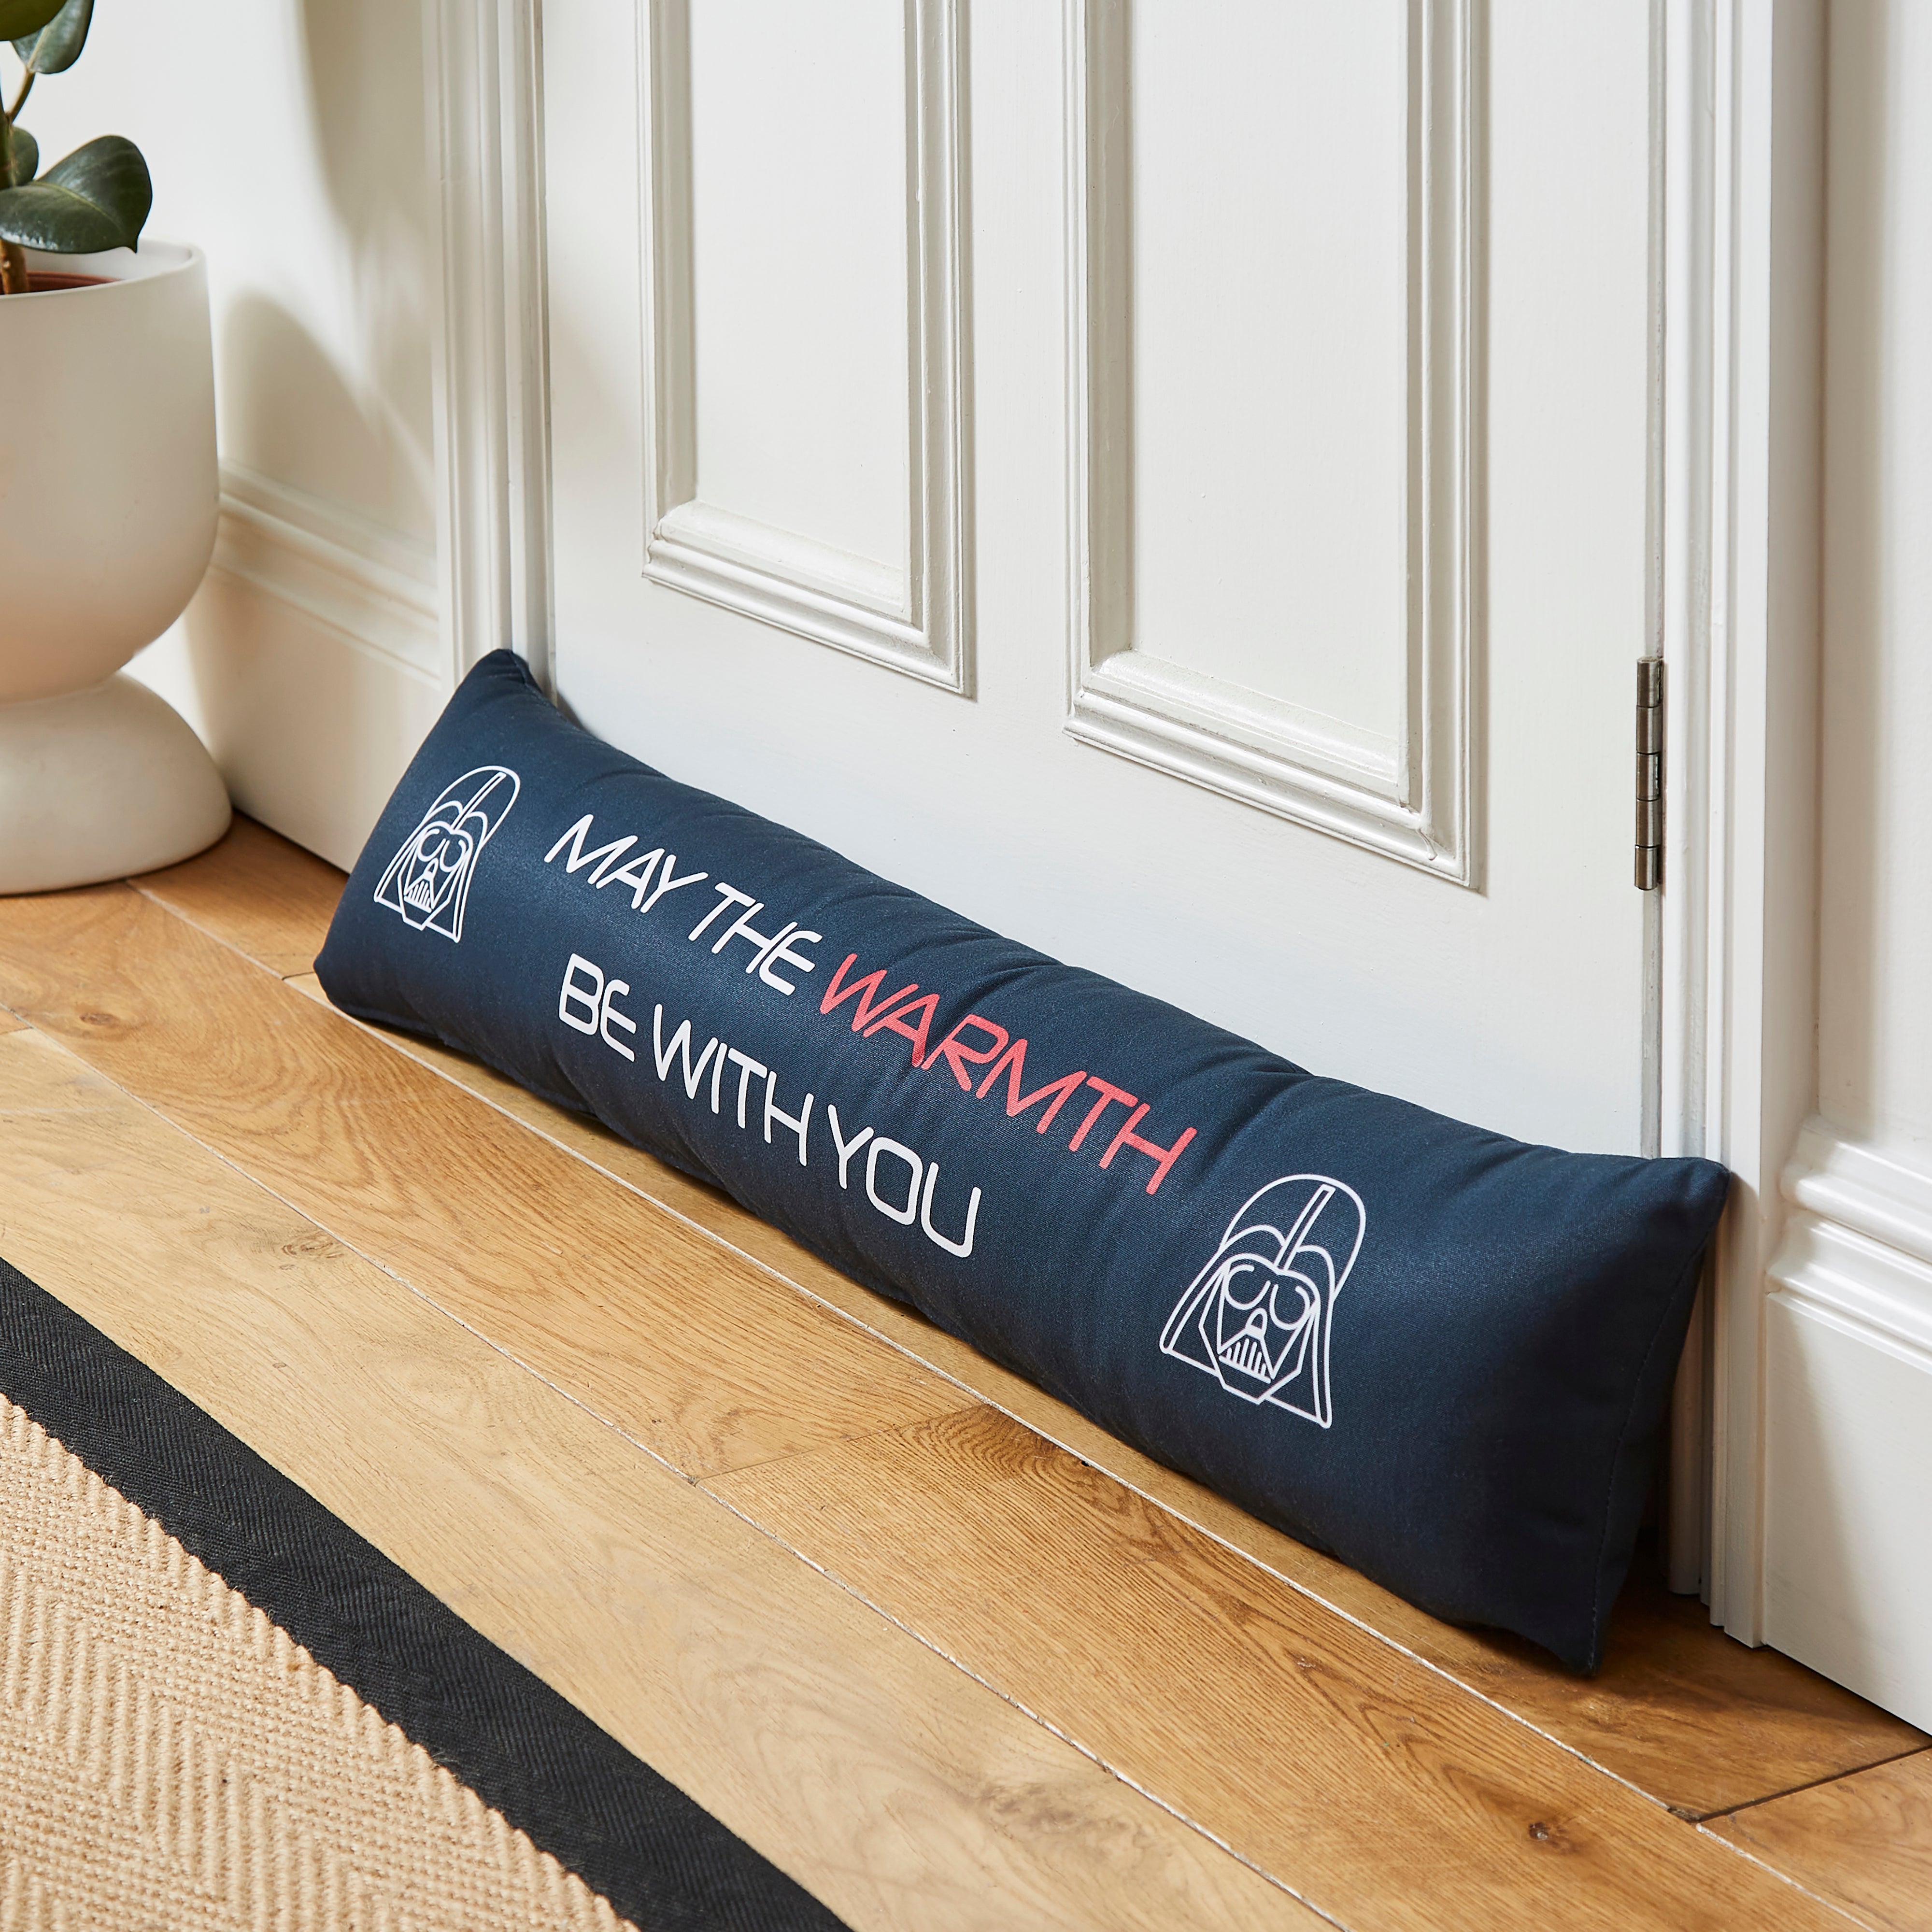 May The Warmth Be With You Star Wars Draught Excluder